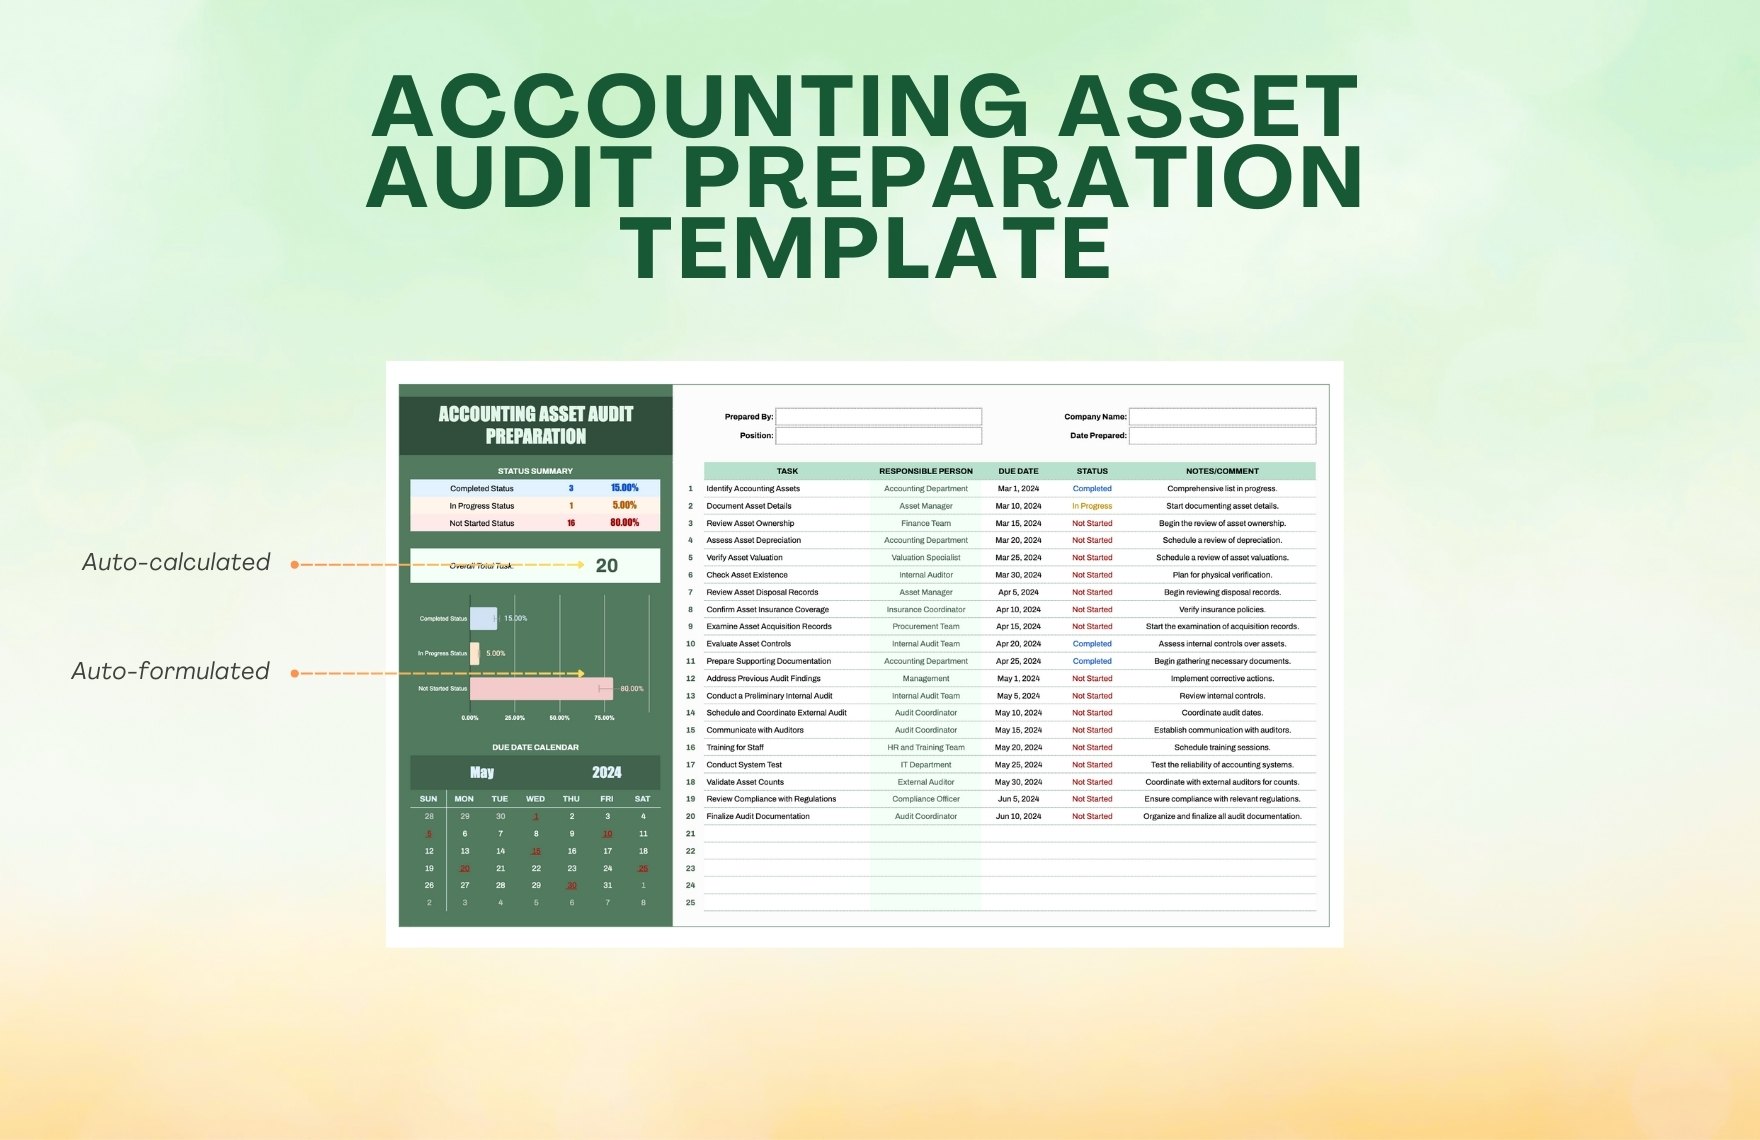 Accounting Asset Audit Preparation Template